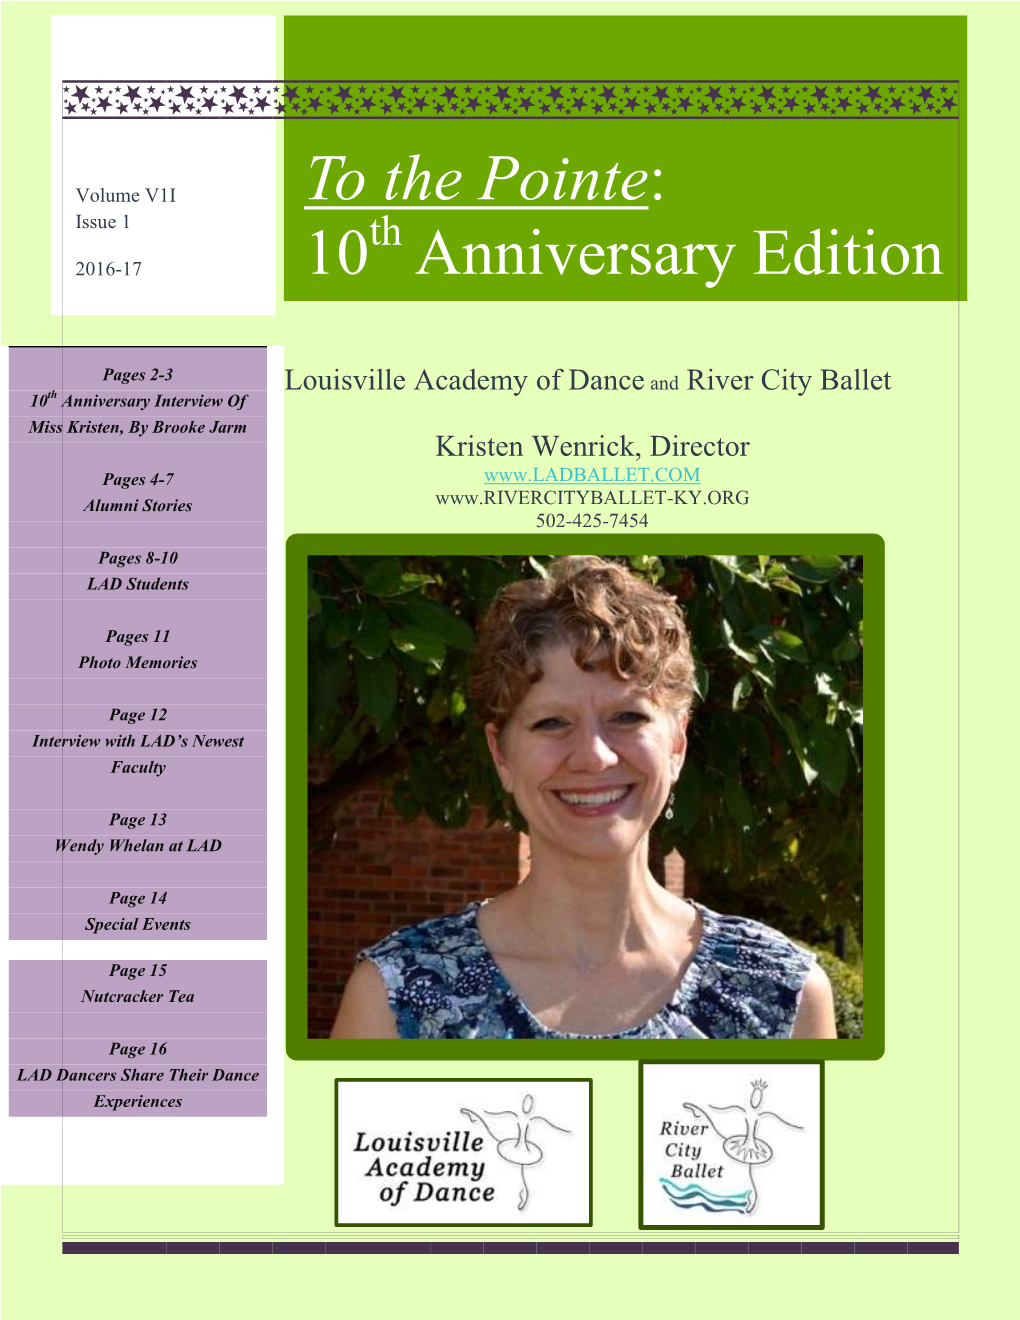 To the Pointe: 10 Anniversary Edition